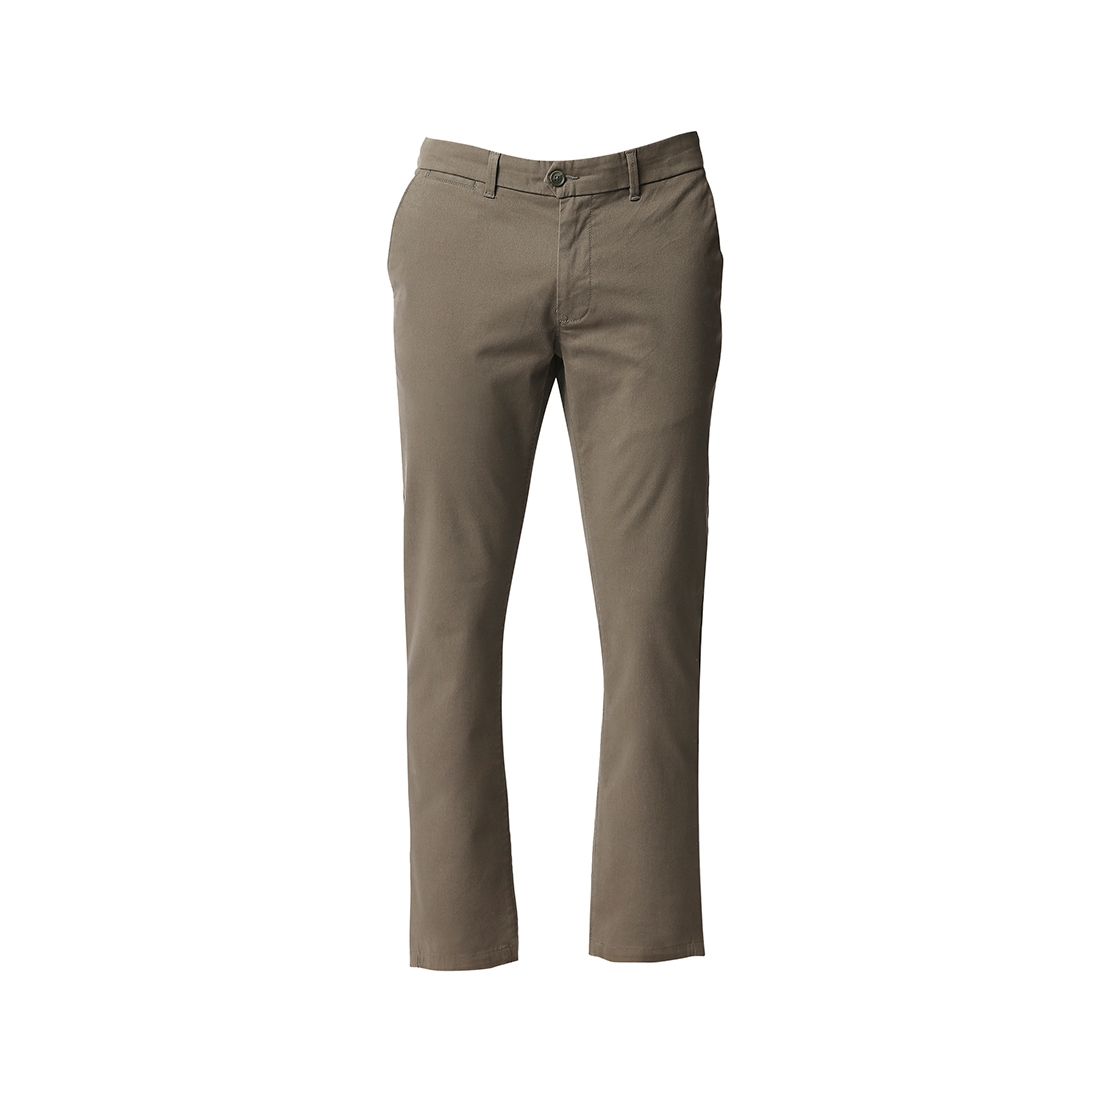 Basics | BASICS CASUAL PLAIN OLIVE COTTON STRETCH TAPERED TROUSERS  5